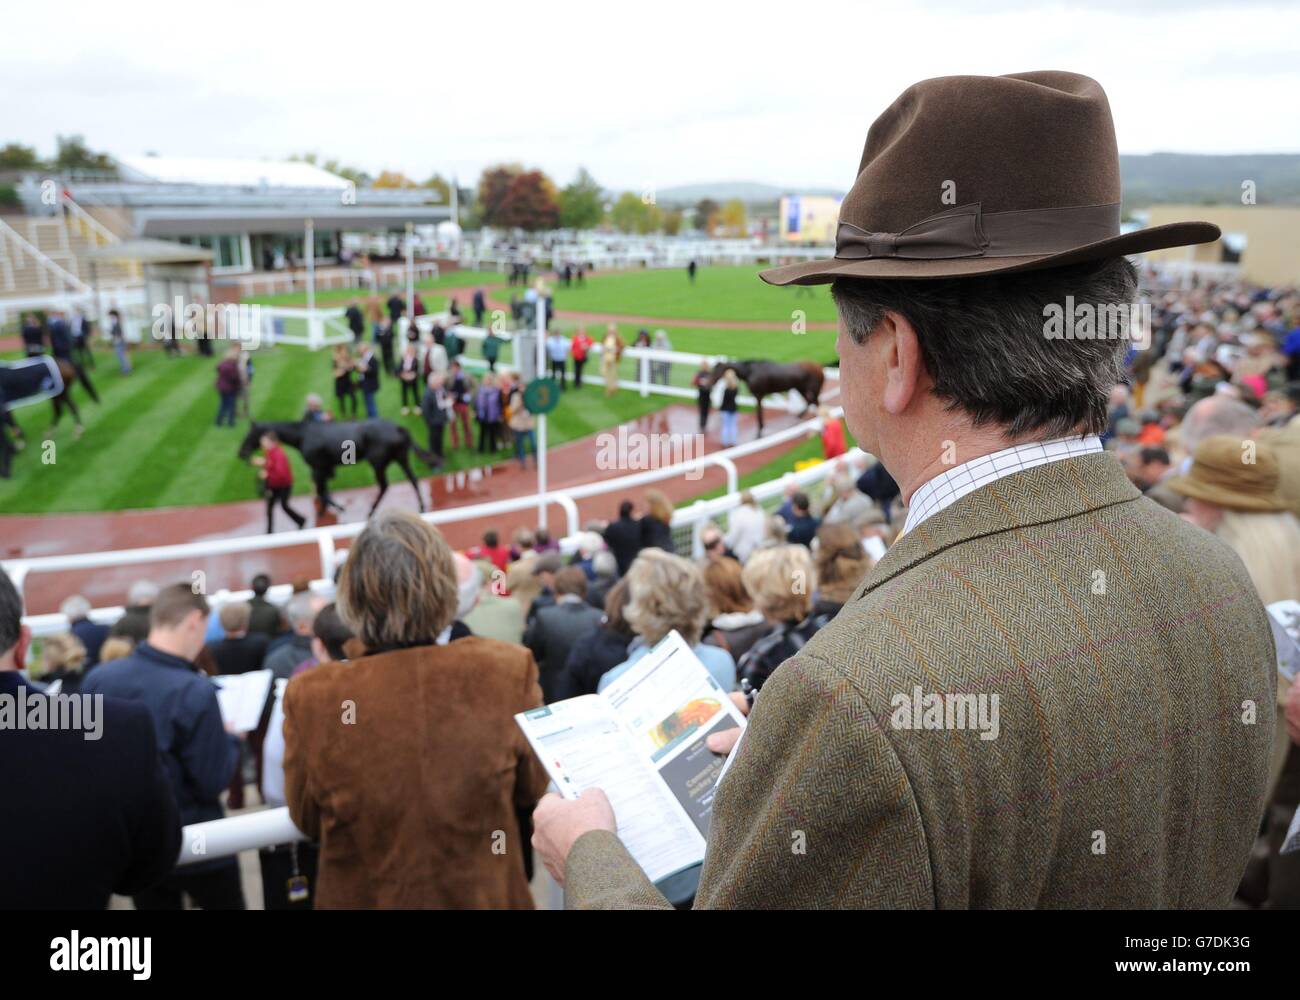 Horse Racing - The Showcase - Day One - Cheltenham Racecourse. A racegoer looks over the winners enclosure during Day one of the 2014 Showcase meeting at Cheltenham Racecourse, Cheltenham. Stock Photo